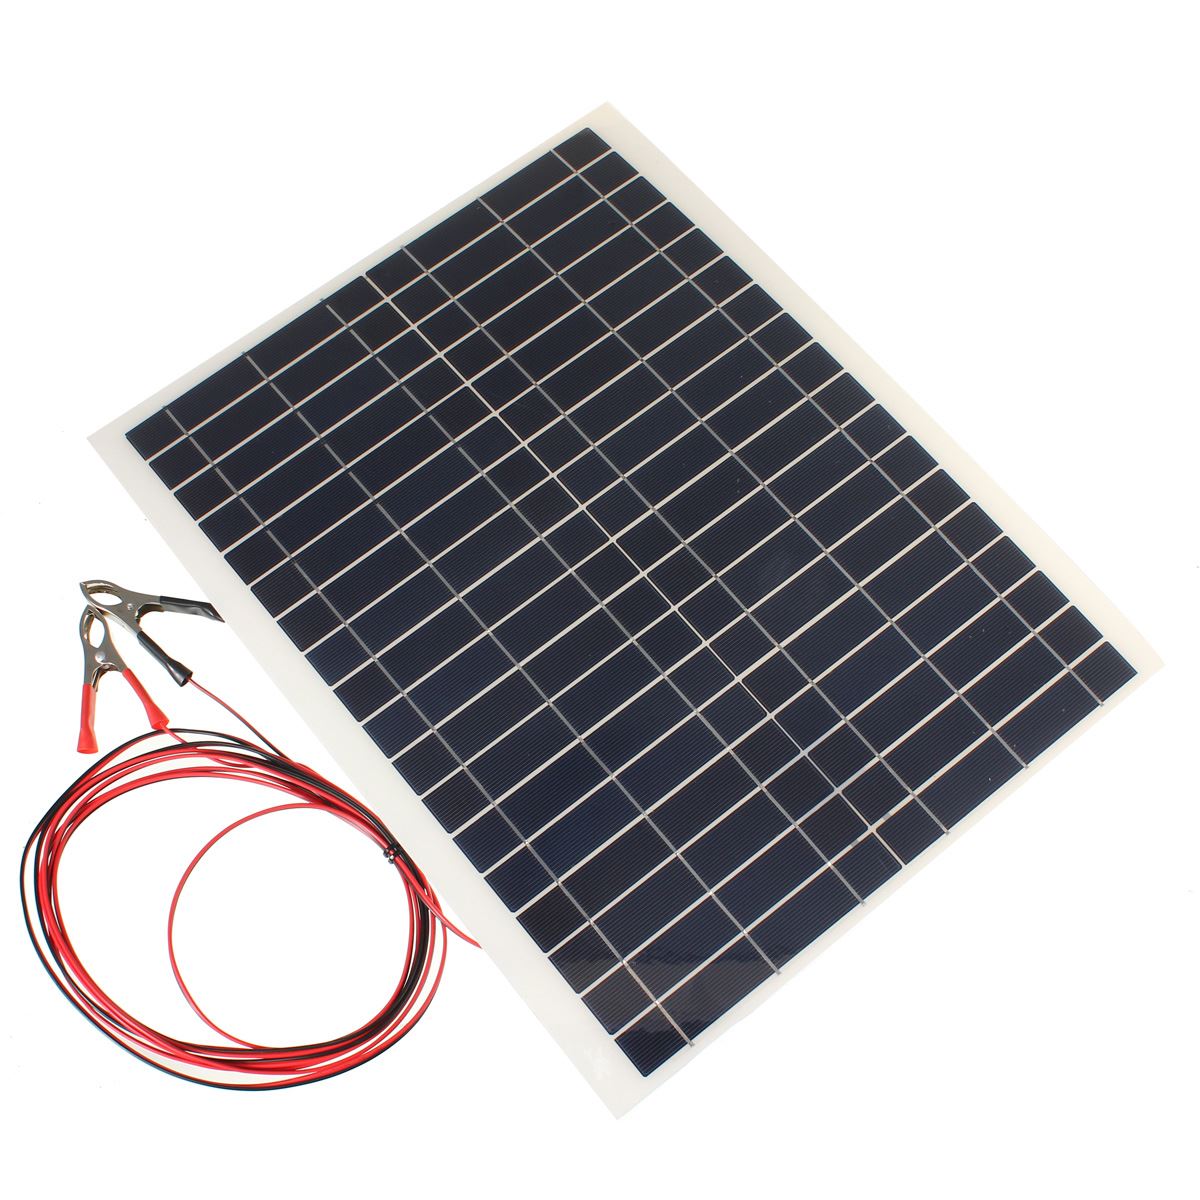 Hot Sale 20W 12V PolyCrystalline Epoxy Cells Solar Panel DIY Solar Module Battery Power Charger+2x Alligator Clips+4m Cable